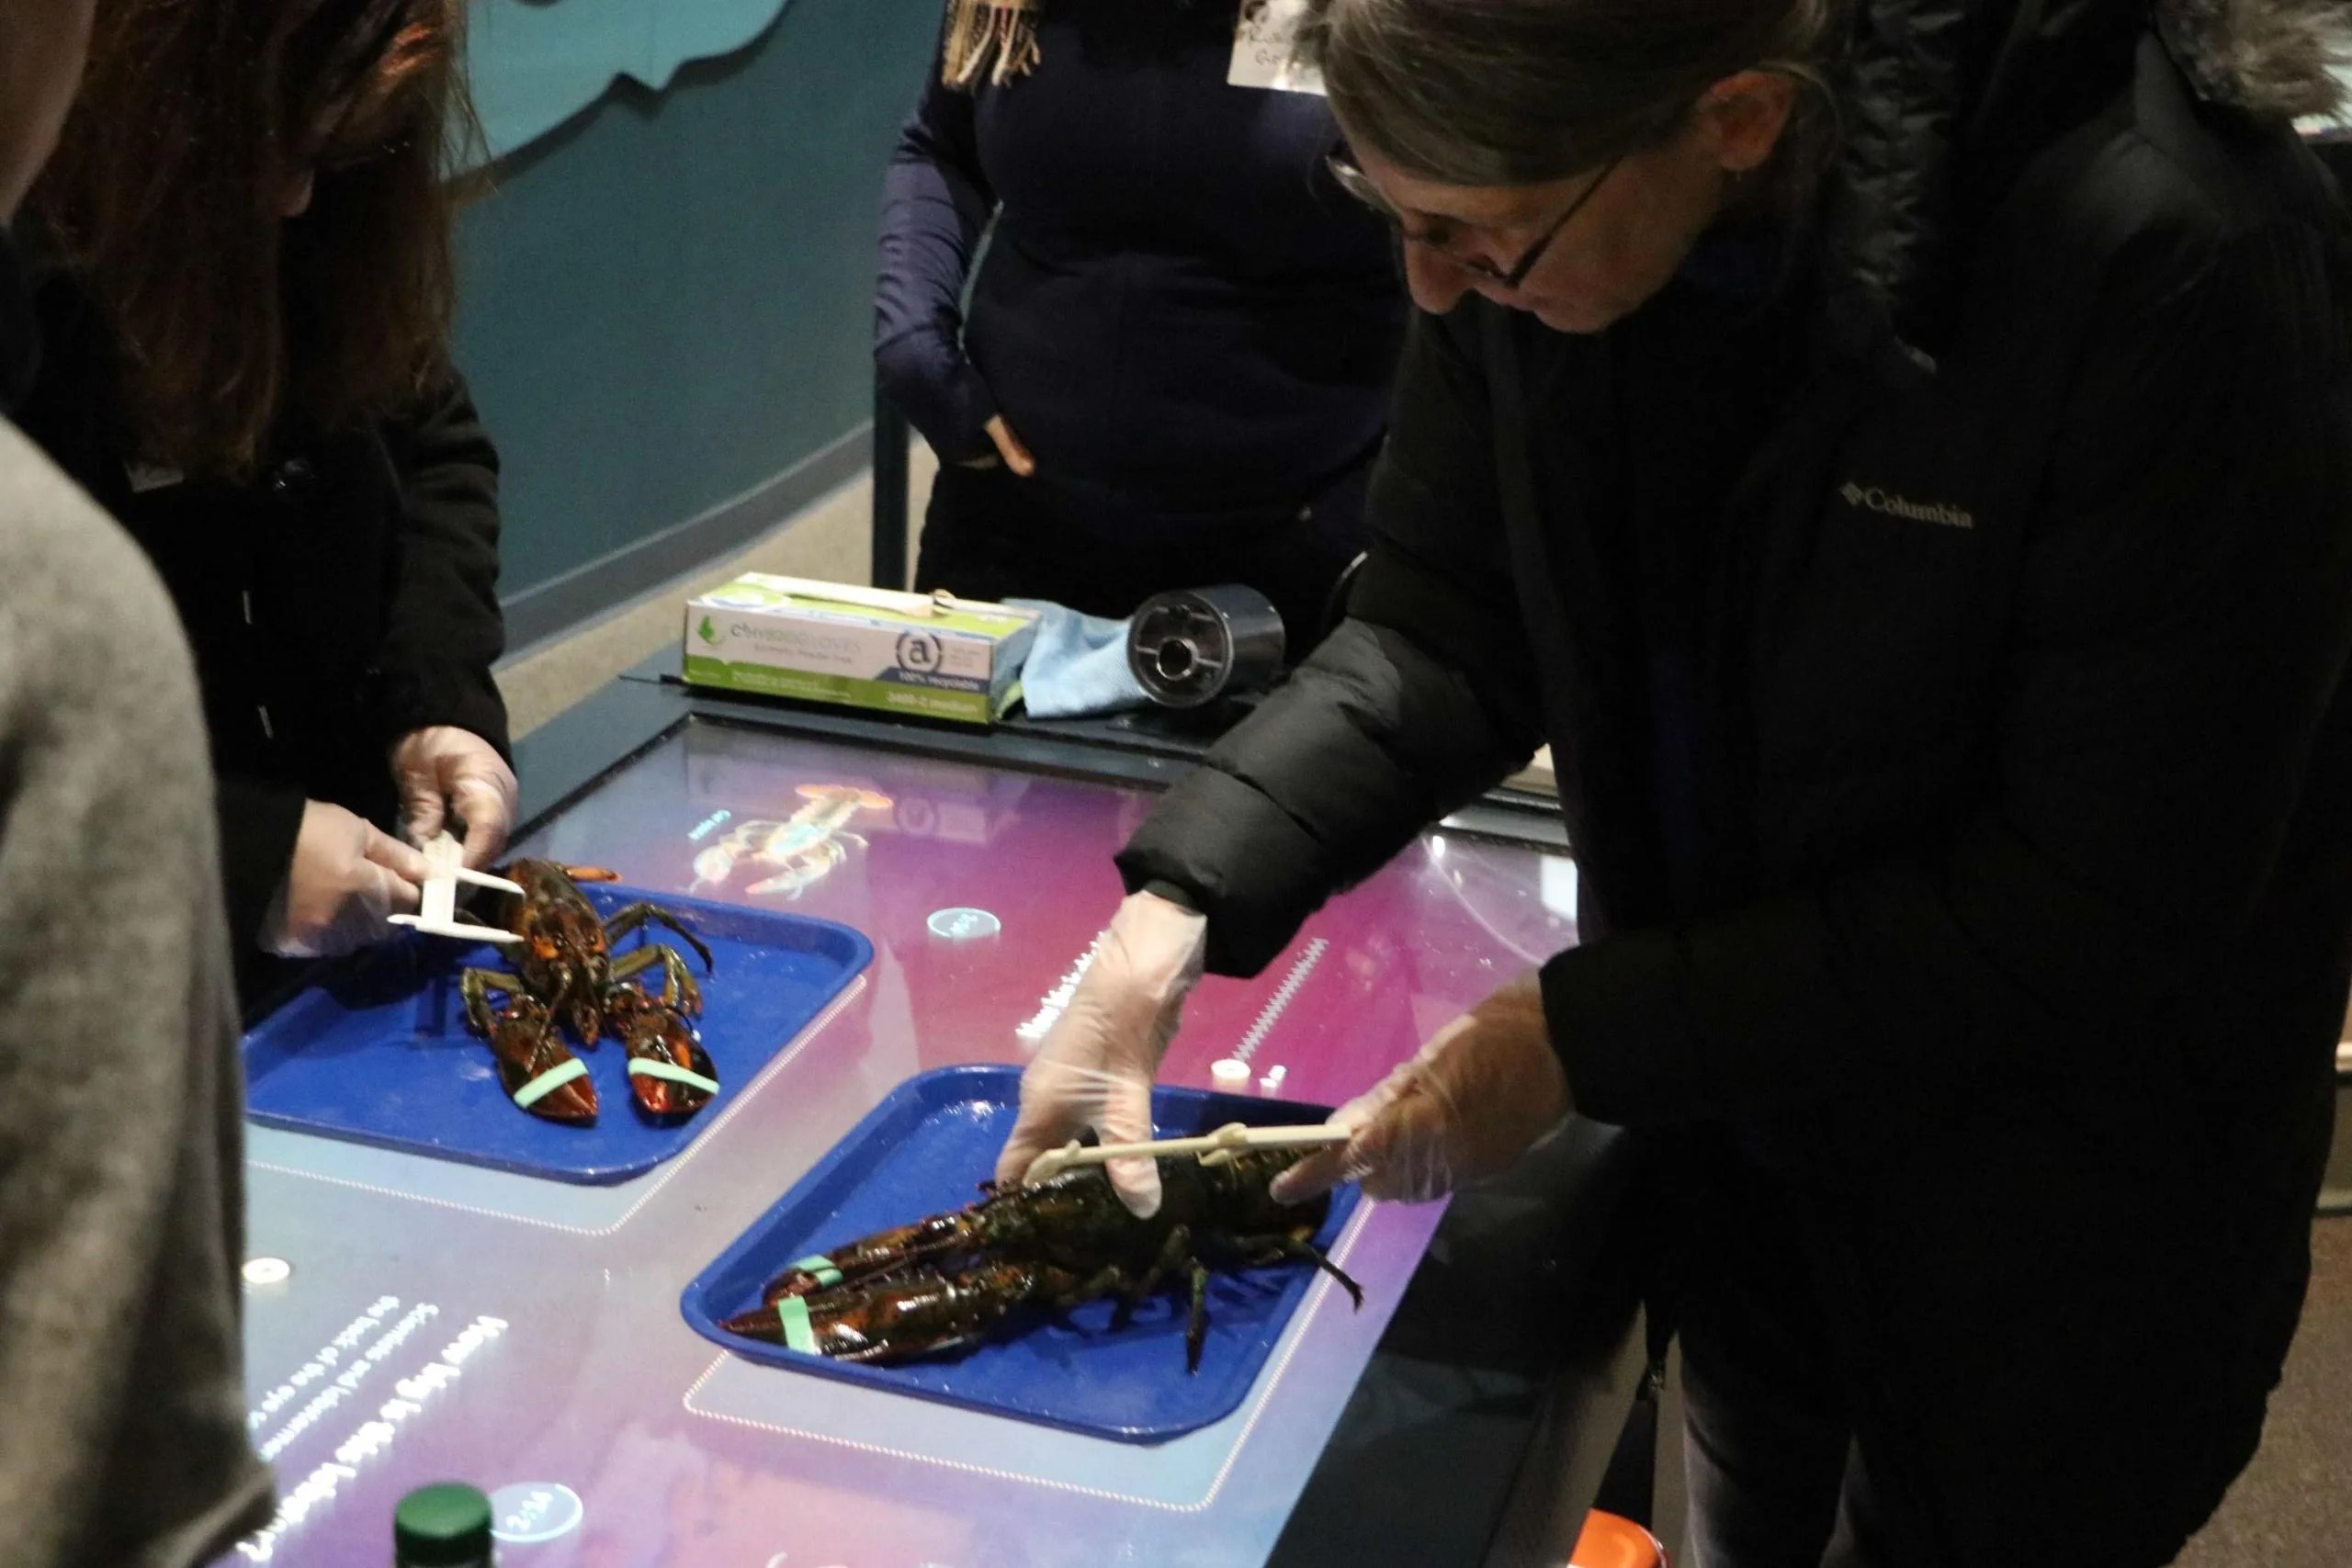 A group of 4 educators are standing around an interactive table conducting an investigation of Lobsters. 2 of the teachers are holding a lobster on a blue tray. They are measuring the carapace of the lobster using a trident. The other two teachers are standing next to them, observing.